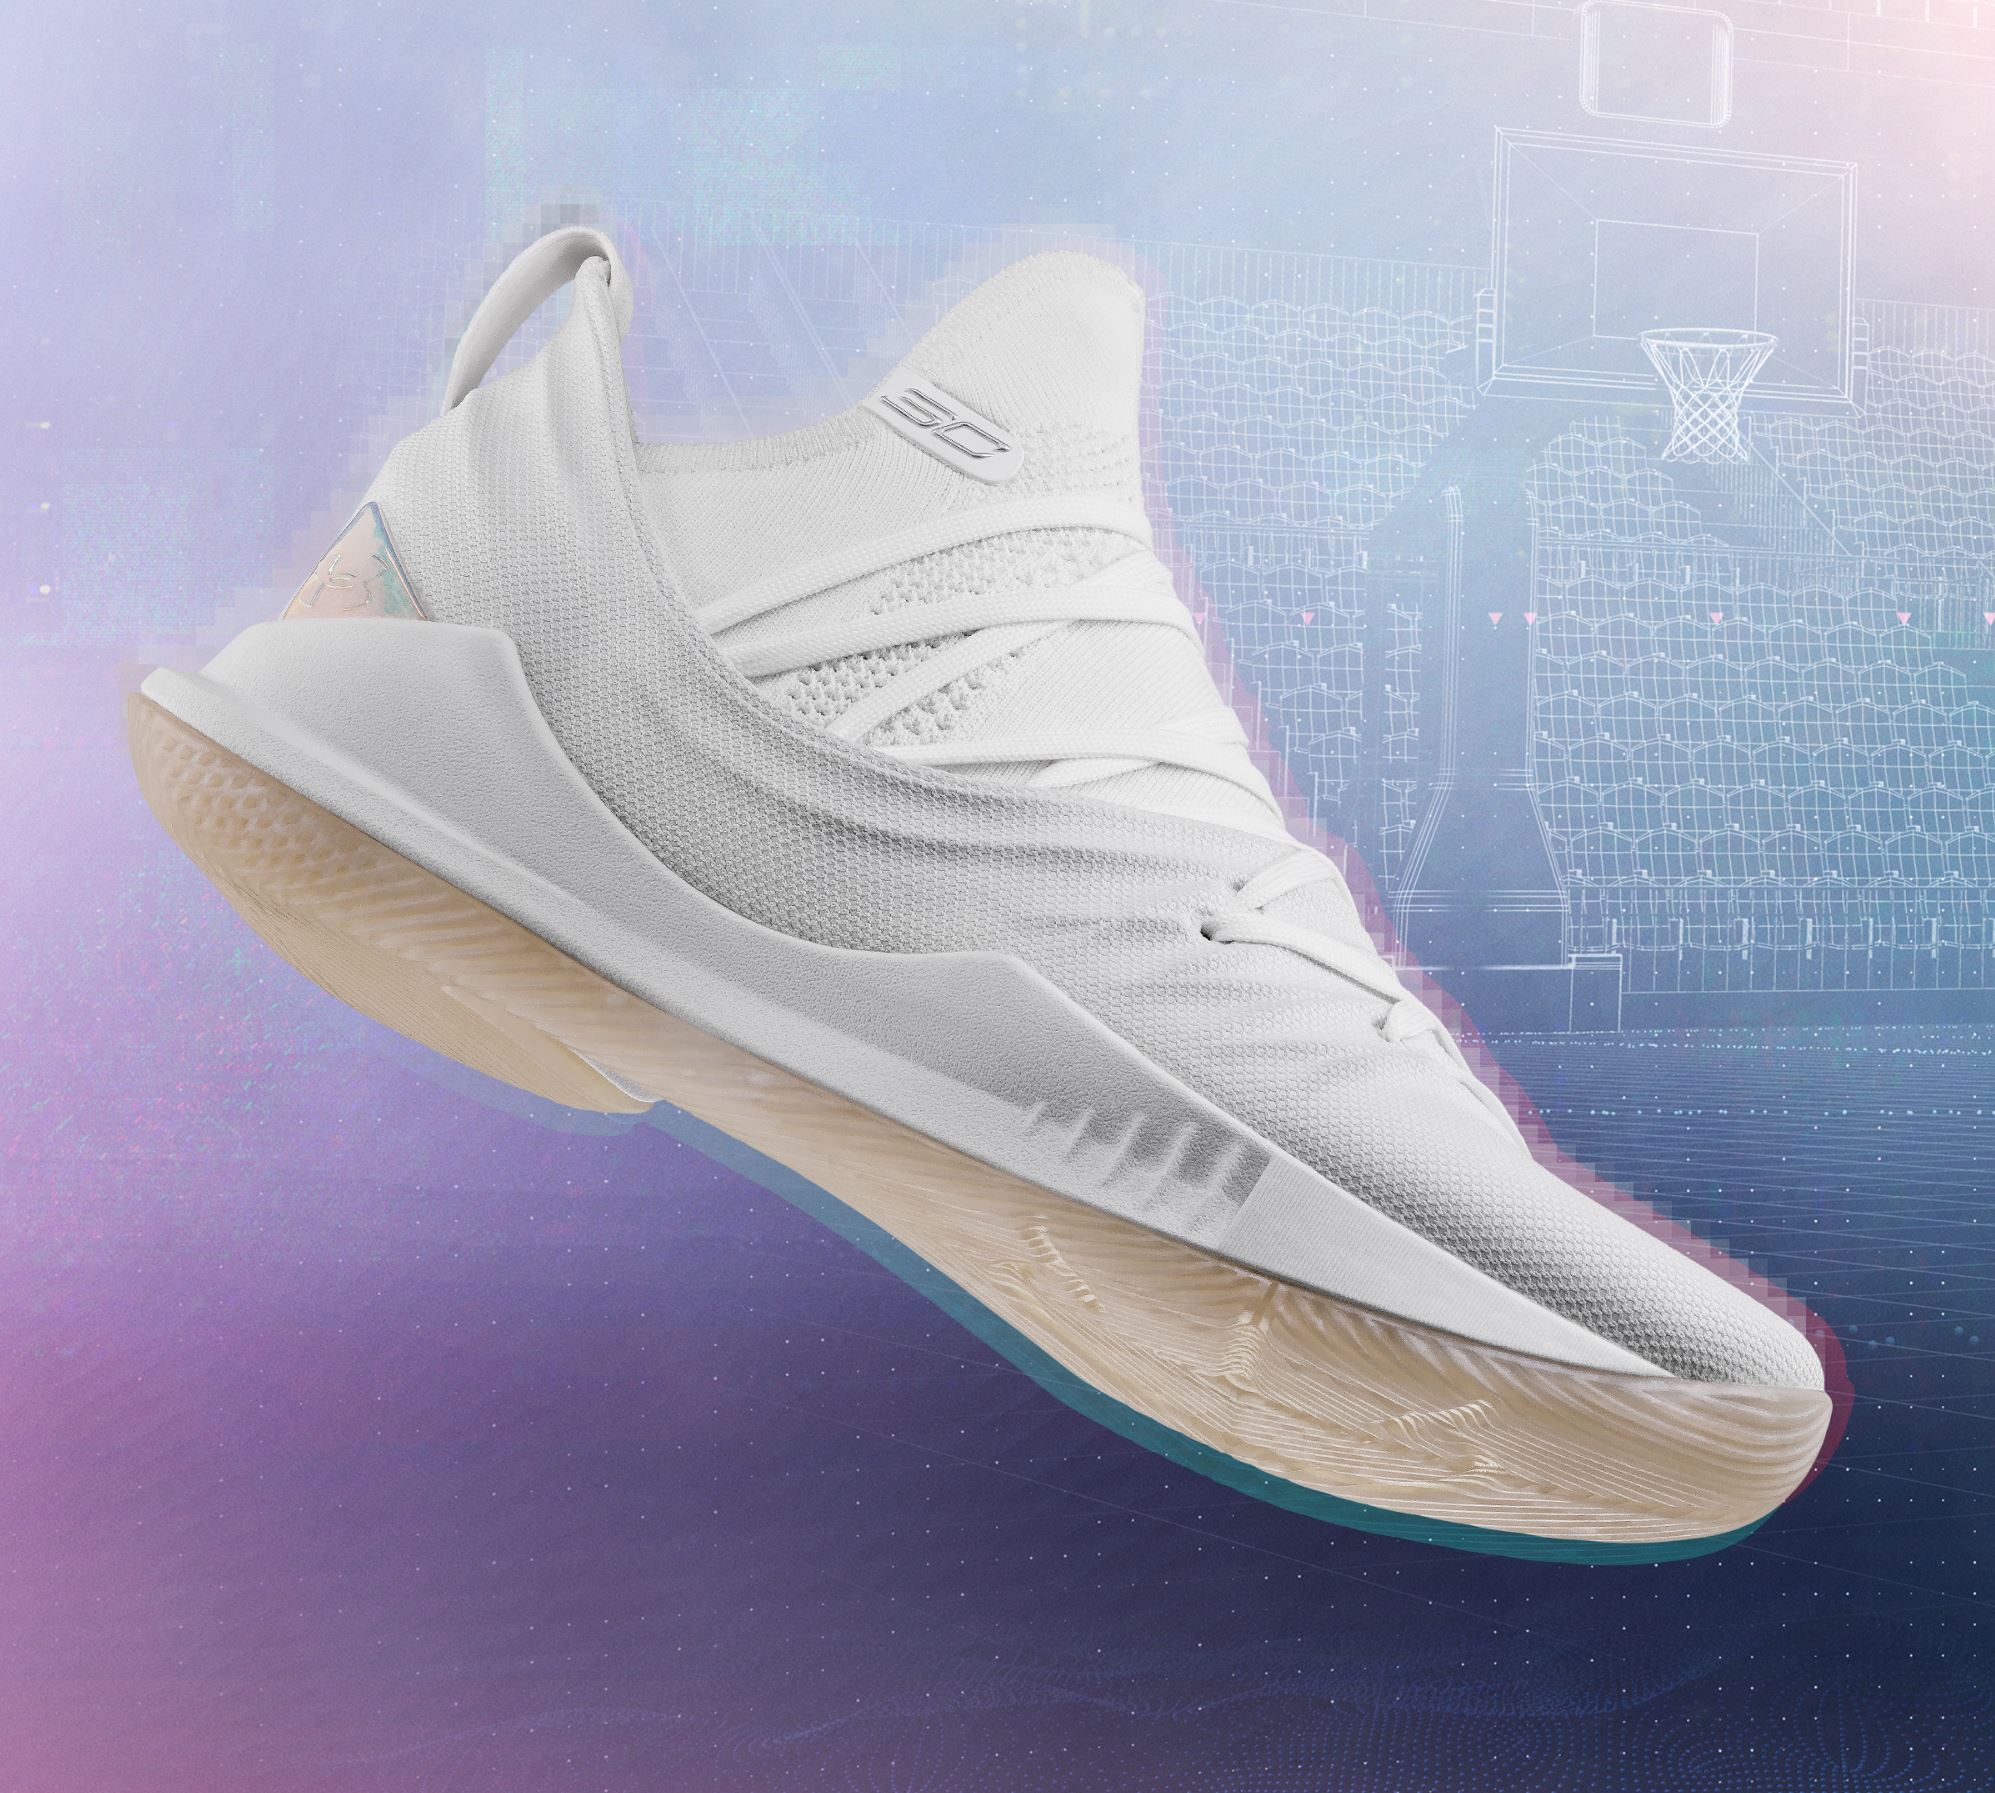 New Curry 5 Colorways Will Debut at 